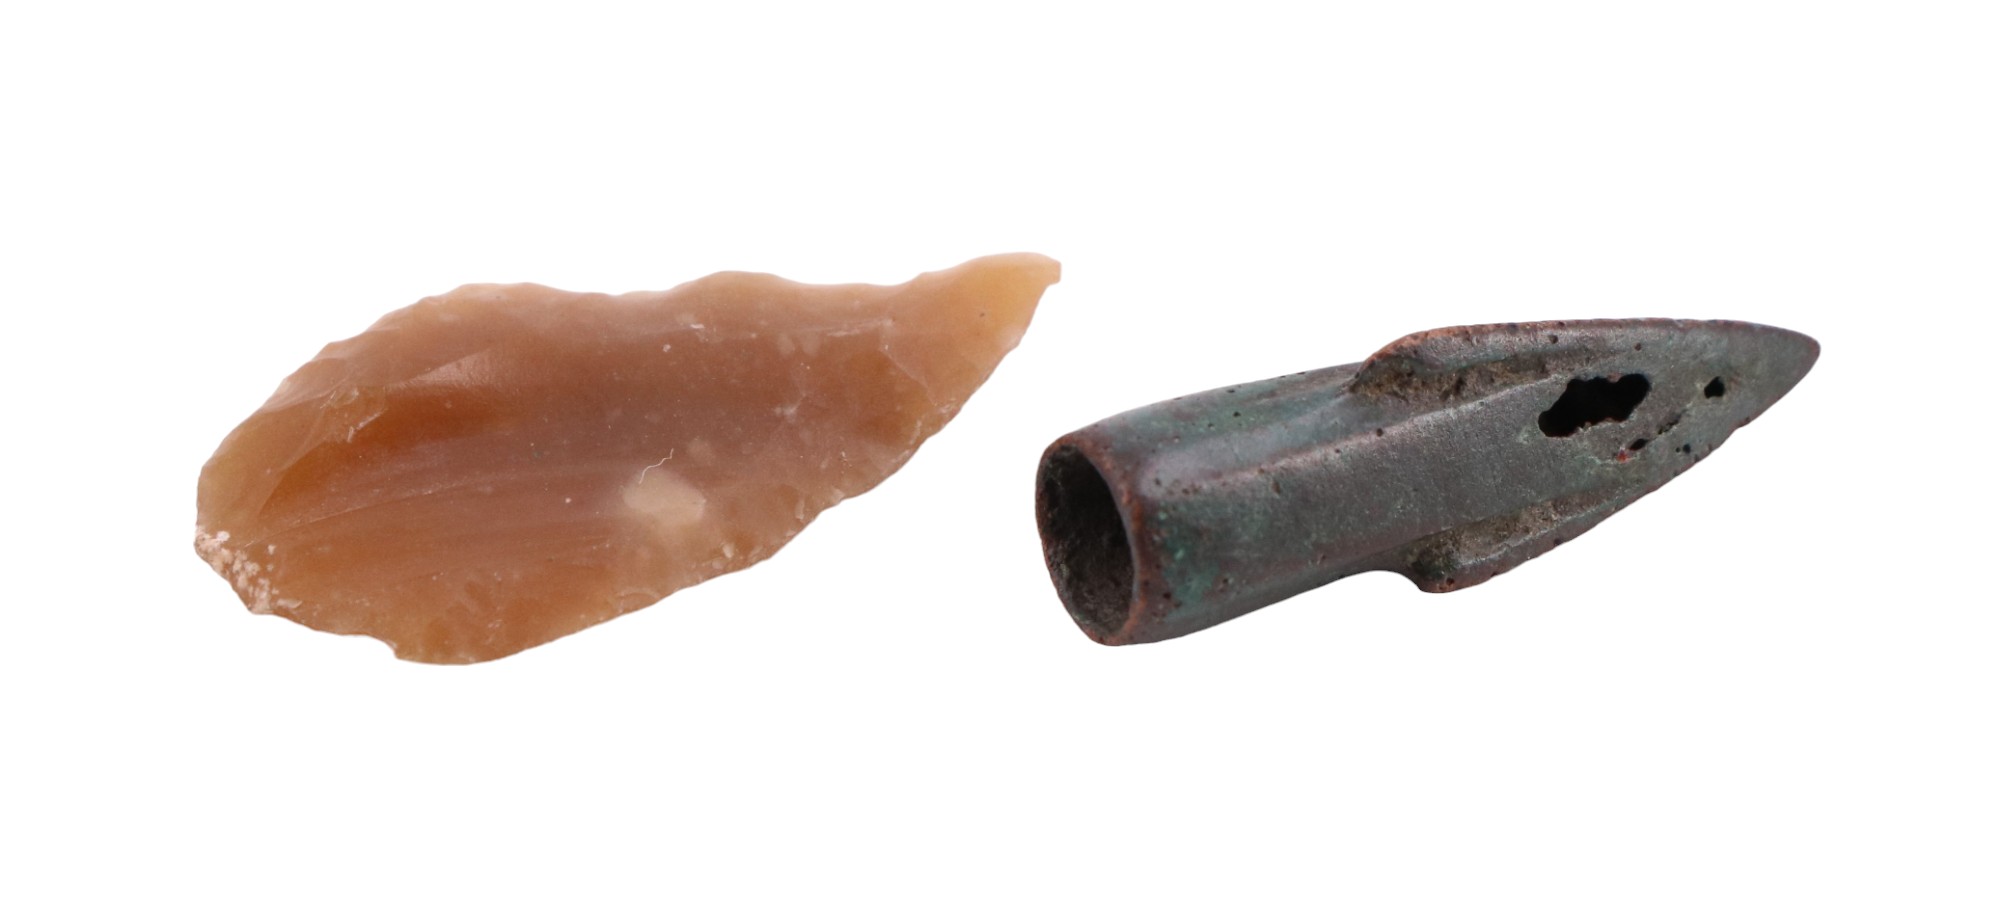 Roman bronze and Neolithic flint arrowheads, former 25 mm - Image 3 of 3